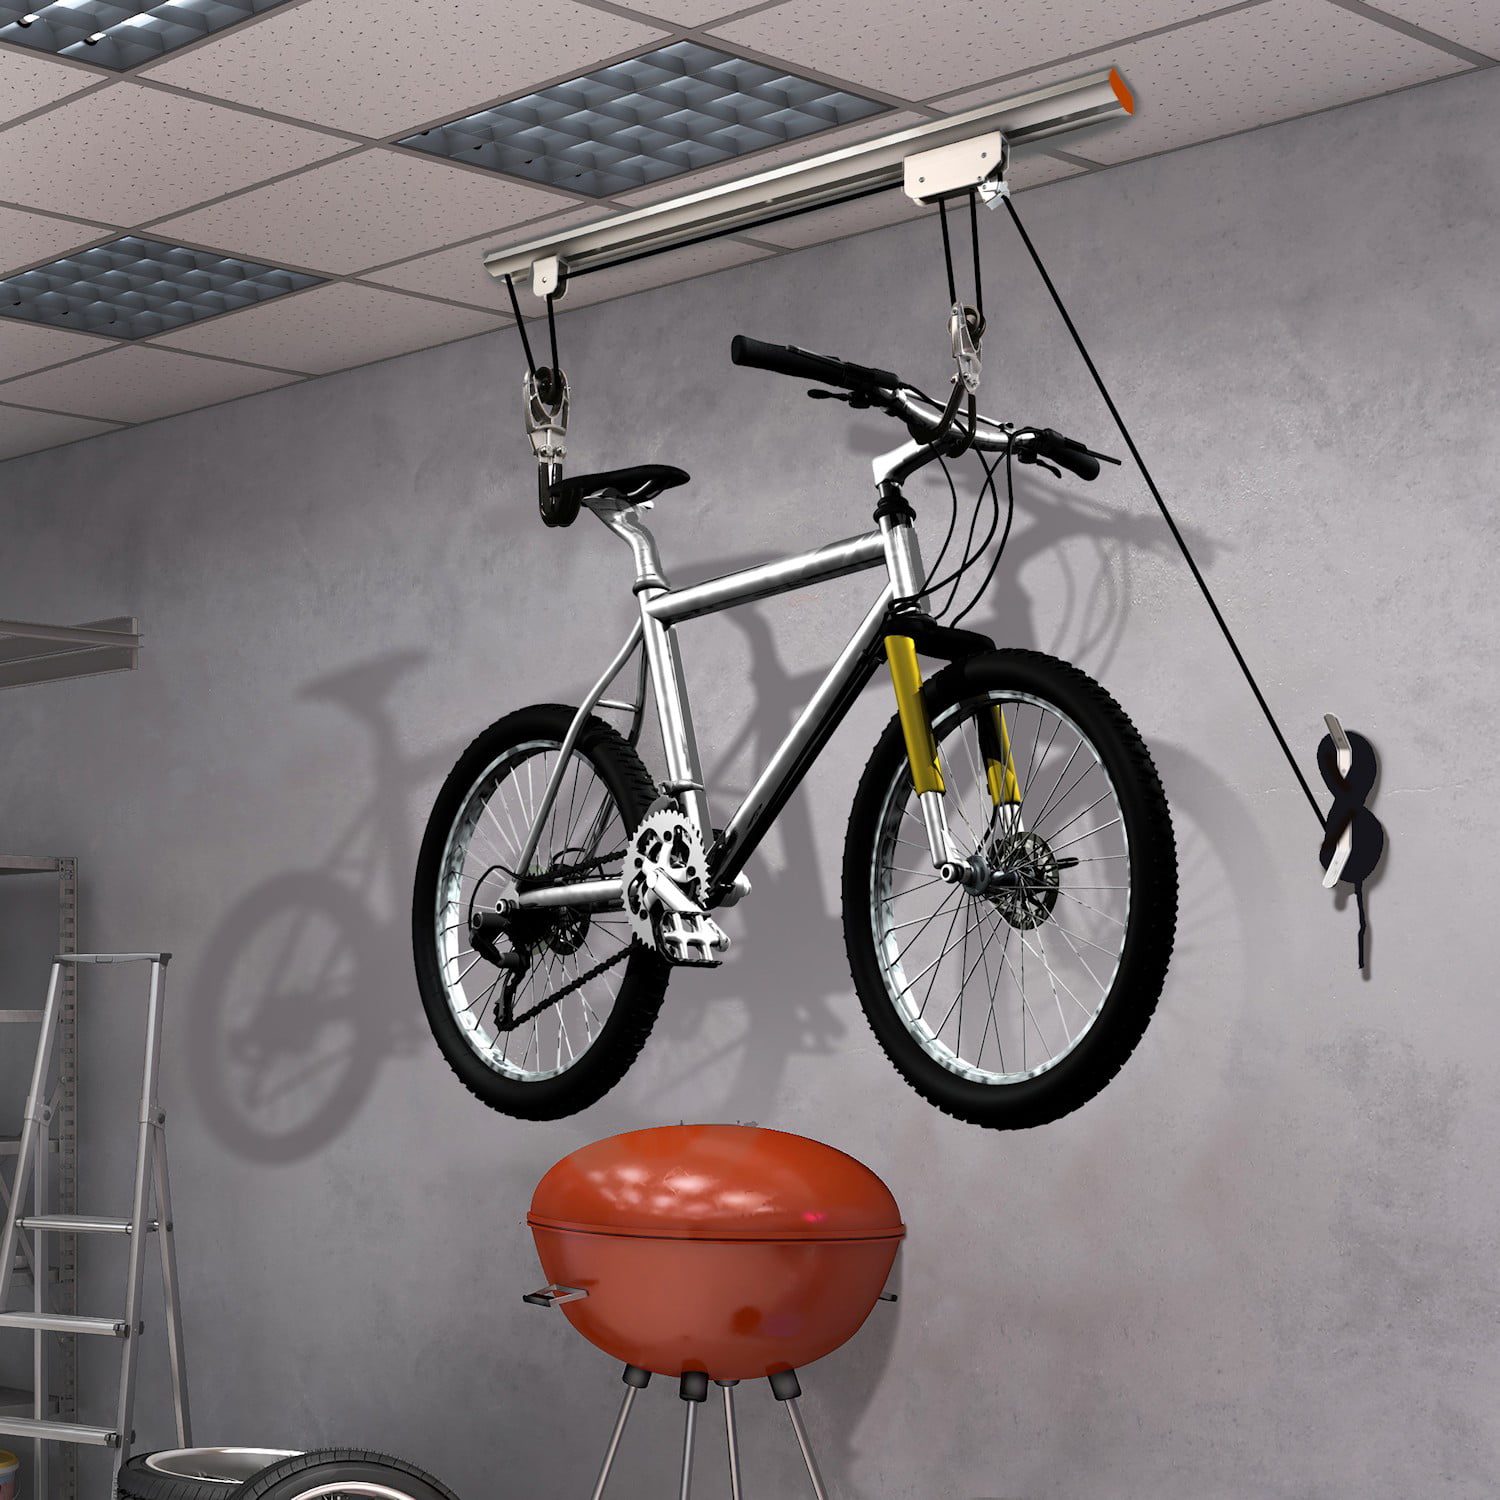 Bike Lift Hoist Heavy Duty Ceiling Mounted Storage Garage Hanger Pulley Rack Great Working Tools Hoists,Hanging Ladder Lifts-Mount Capacity Hooks and Pulleys Convenient Bicycle or Hangers for Garage, 